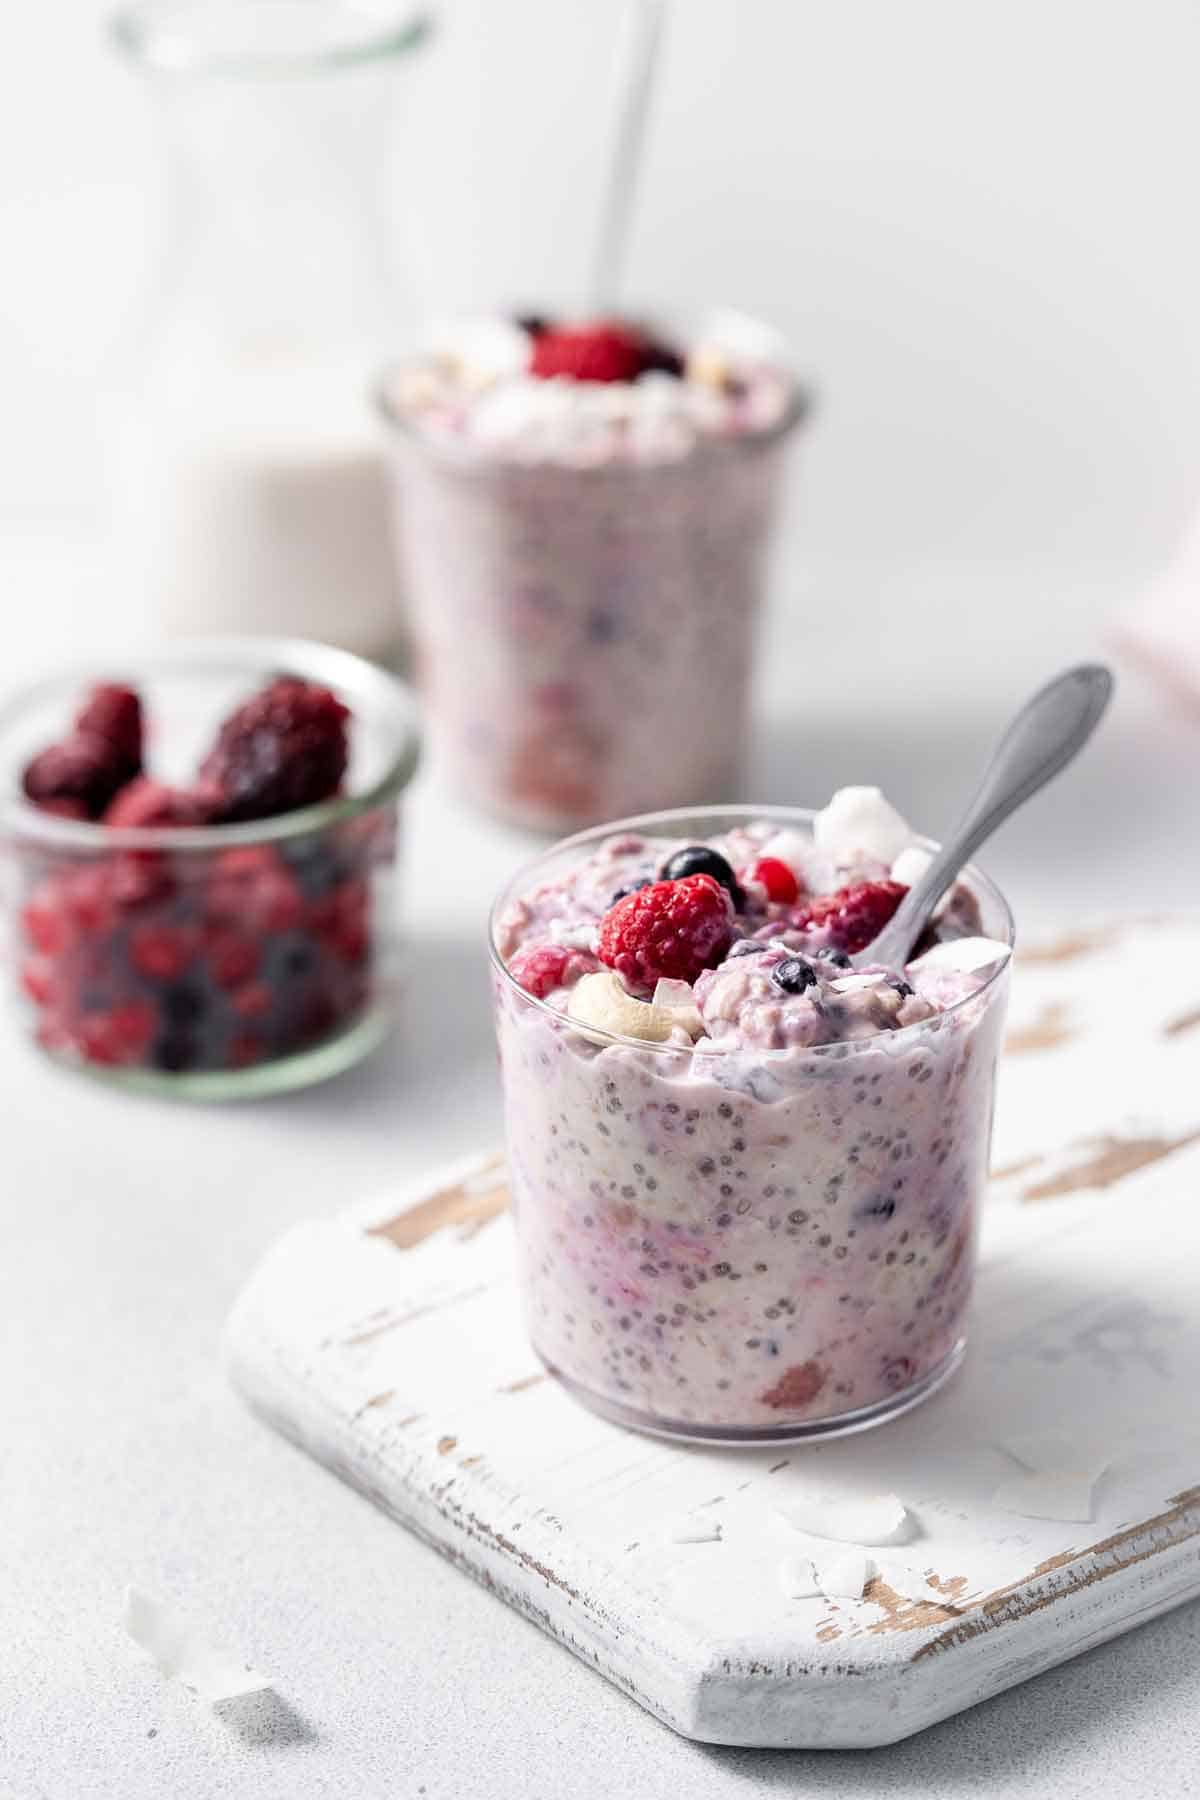 A jar of overnight oats with frozen fruit with a spoon inside with a small jar of mixed berries and another jar in the background.